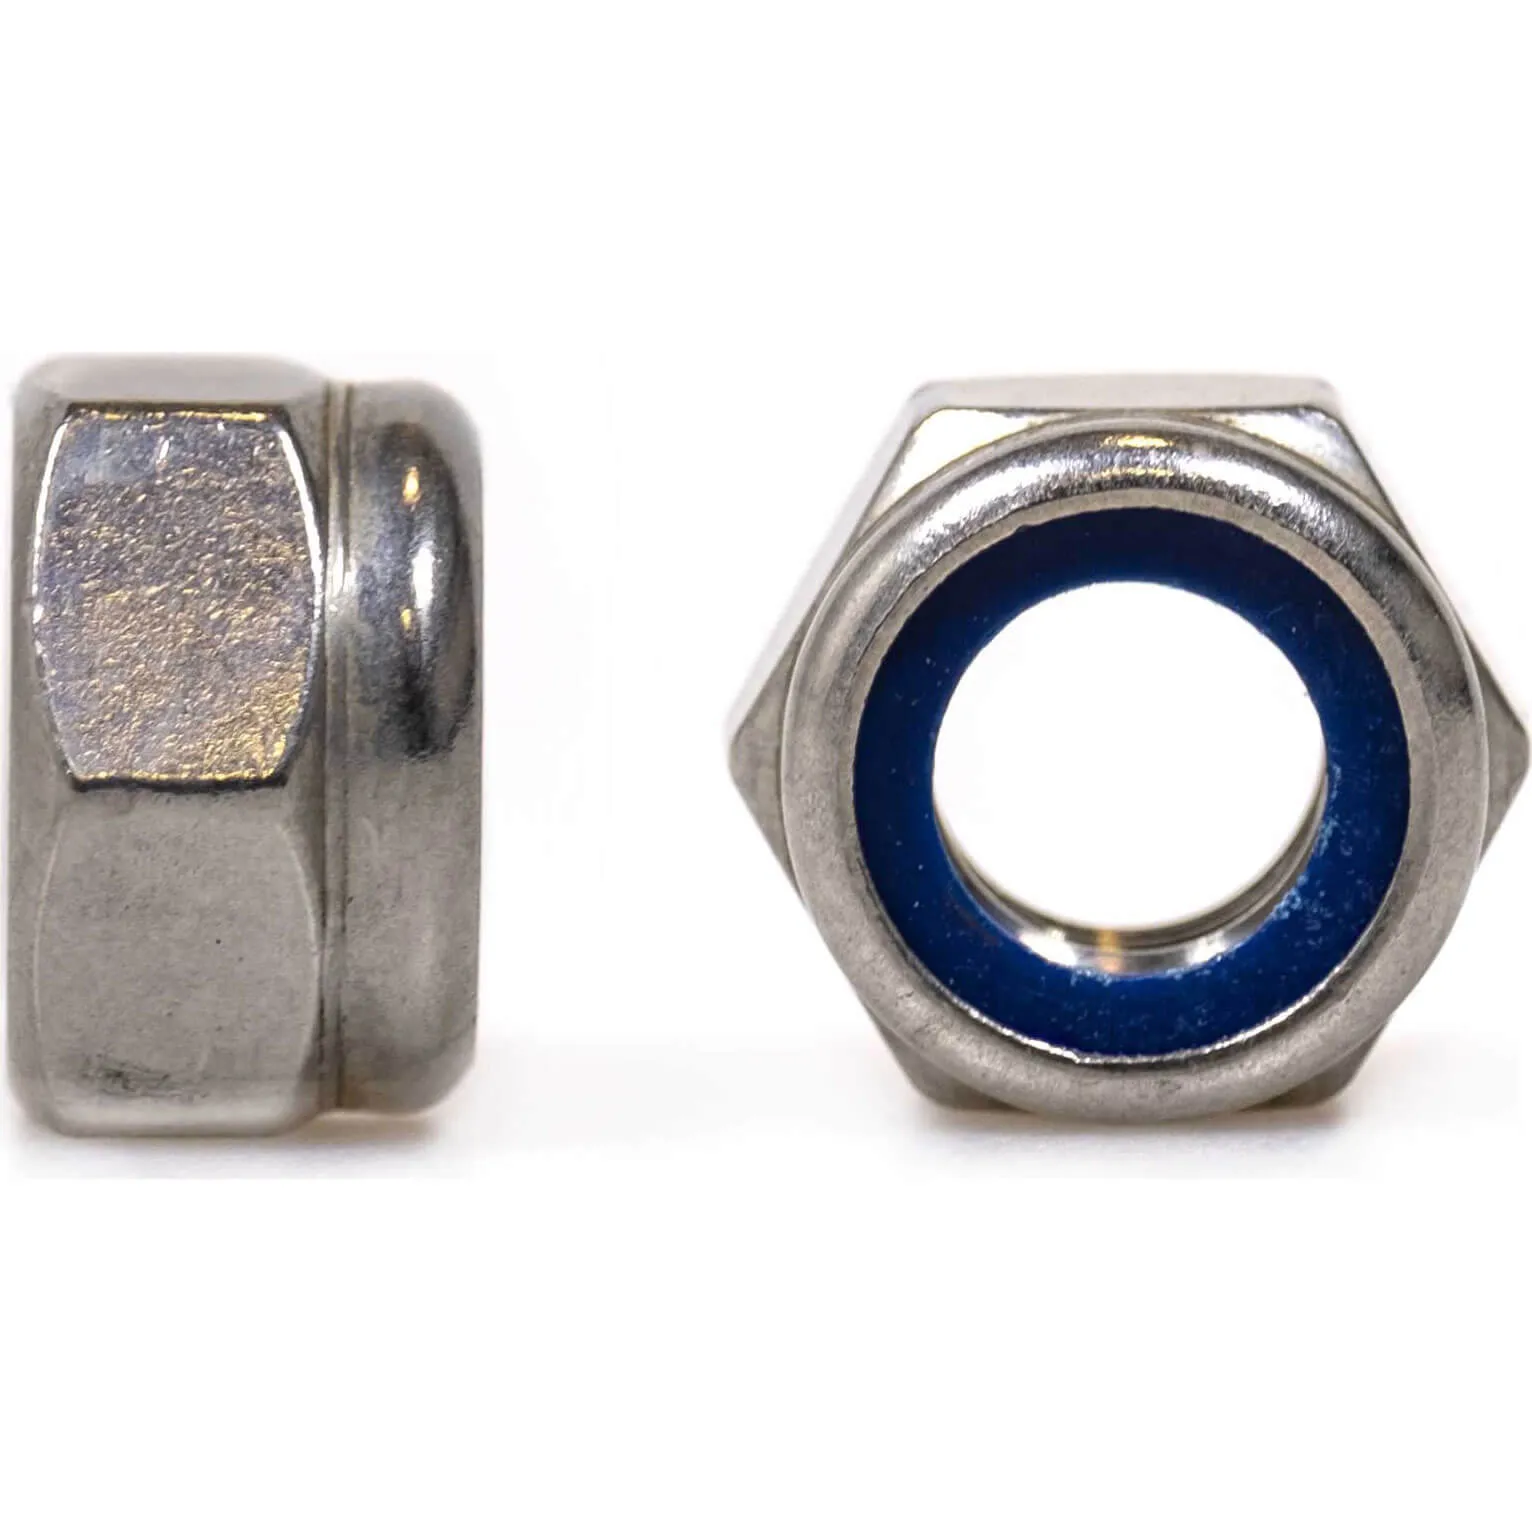 Sirius A2 304 Stainless Steel Hexagon Lock Nuts - M16